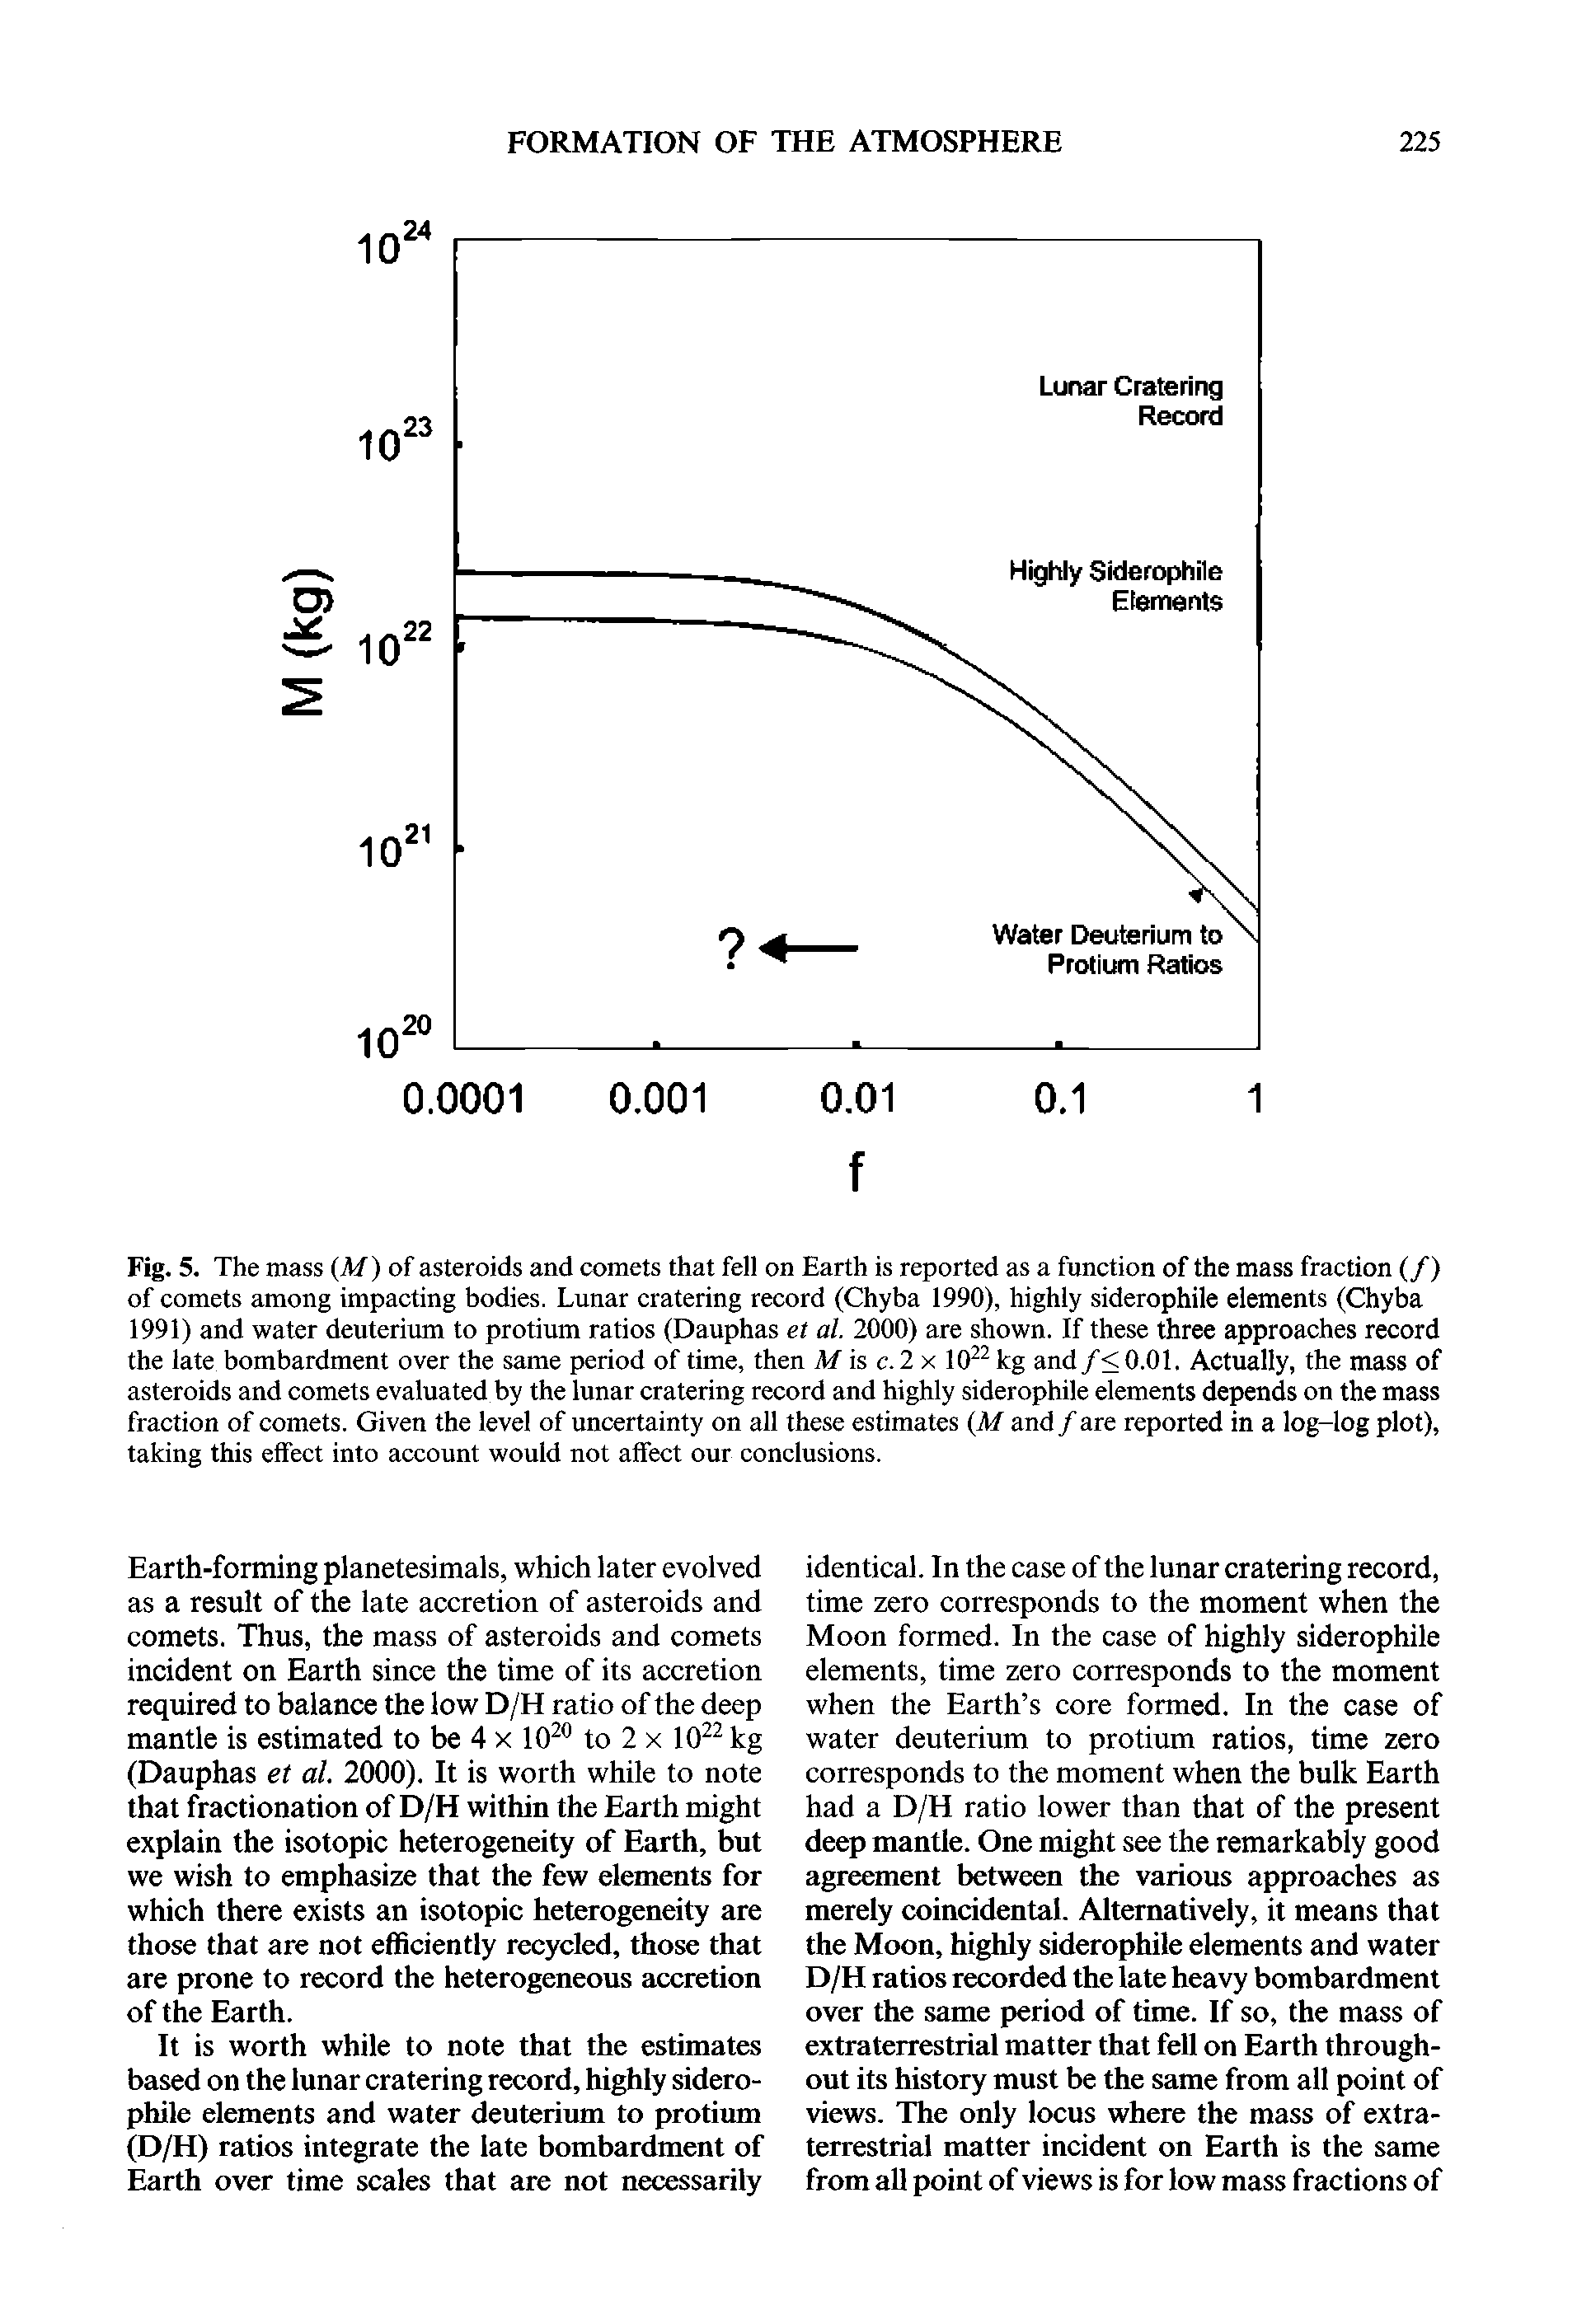 Fig. 5. The mass (M) of asteroids and comets that fell on Earth is reported as a function of the mass fraction (/) of comets among impacting bodies. Lunar cratering record (Chyba 1990), highly siderophile elements (Chyba 1991) and water deuterium to protium ratios (Dauphas et al. 2000) are shown. If these three approaches record the late bombardment over the same period of time, then M is c. 2 x 10 kg and /< 0.01. Actually, the mass of asteroids and comets evaluated by the lunar cratering record and highly siderophile elements depends on the mass fraction of comets. Given the level of uncertainty on all these estimates (M and /are reported in a log-log plot), taking this effect into account would not affect our conclusions.